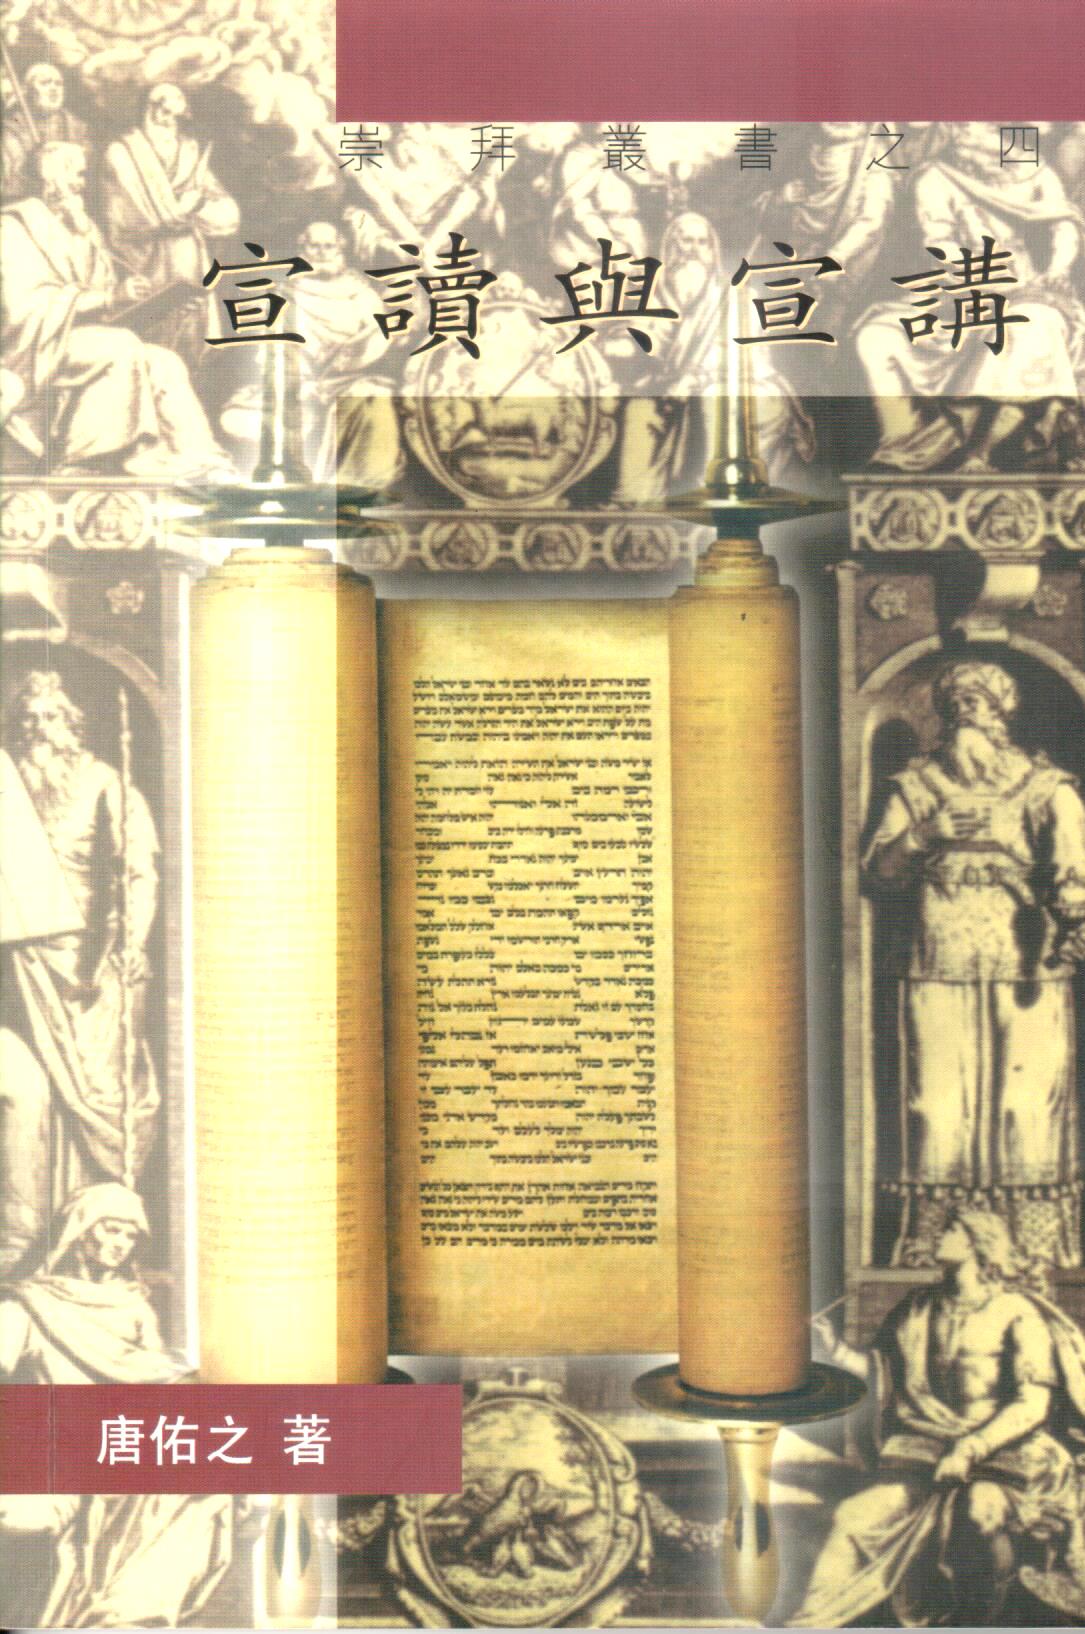 Cover of 宣讀與宣講：話語的職事